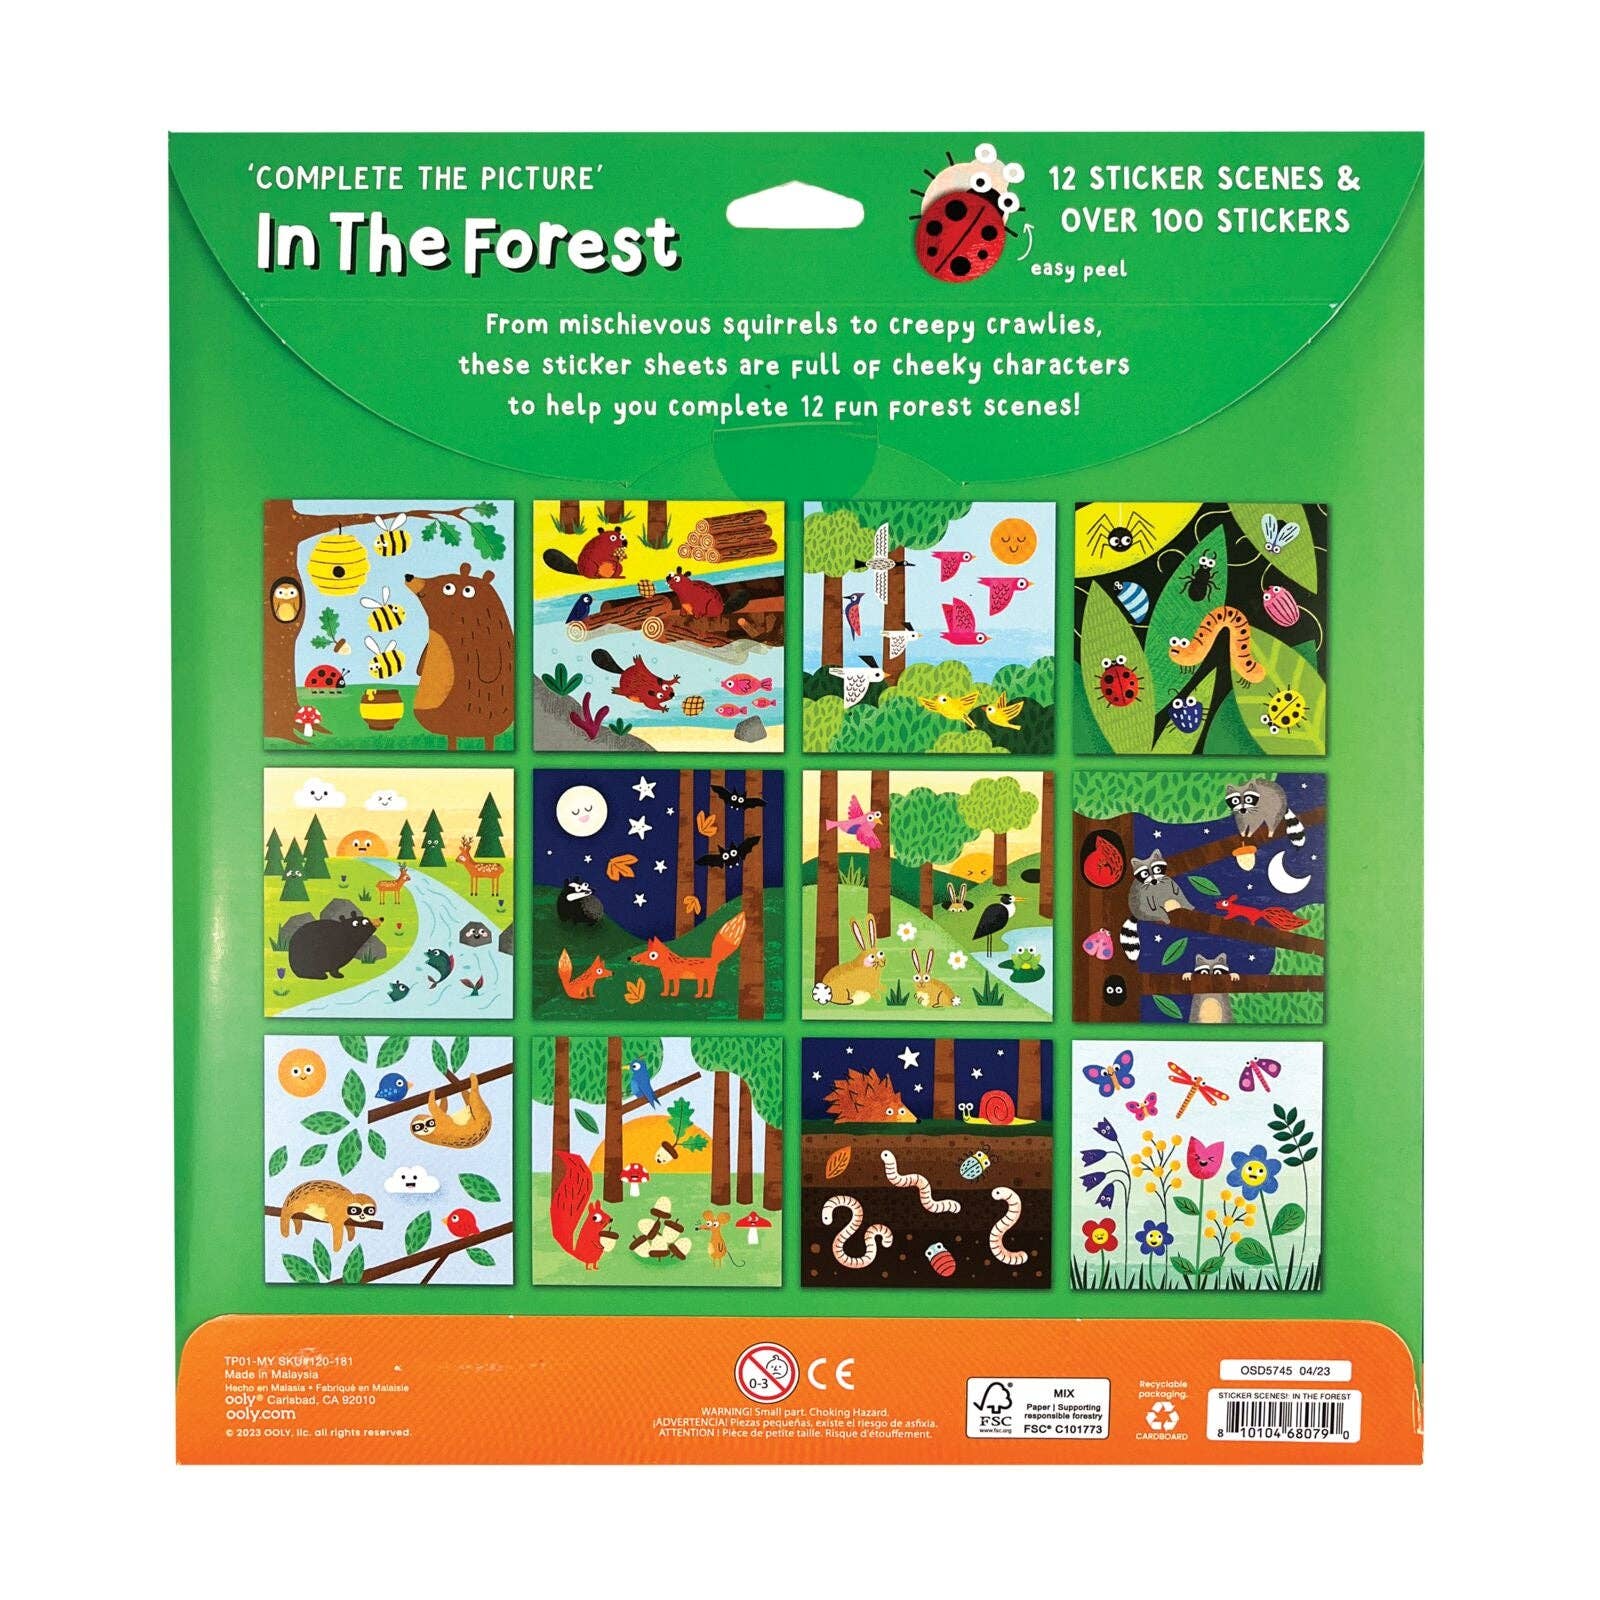 In The Forest Sticker Scenes